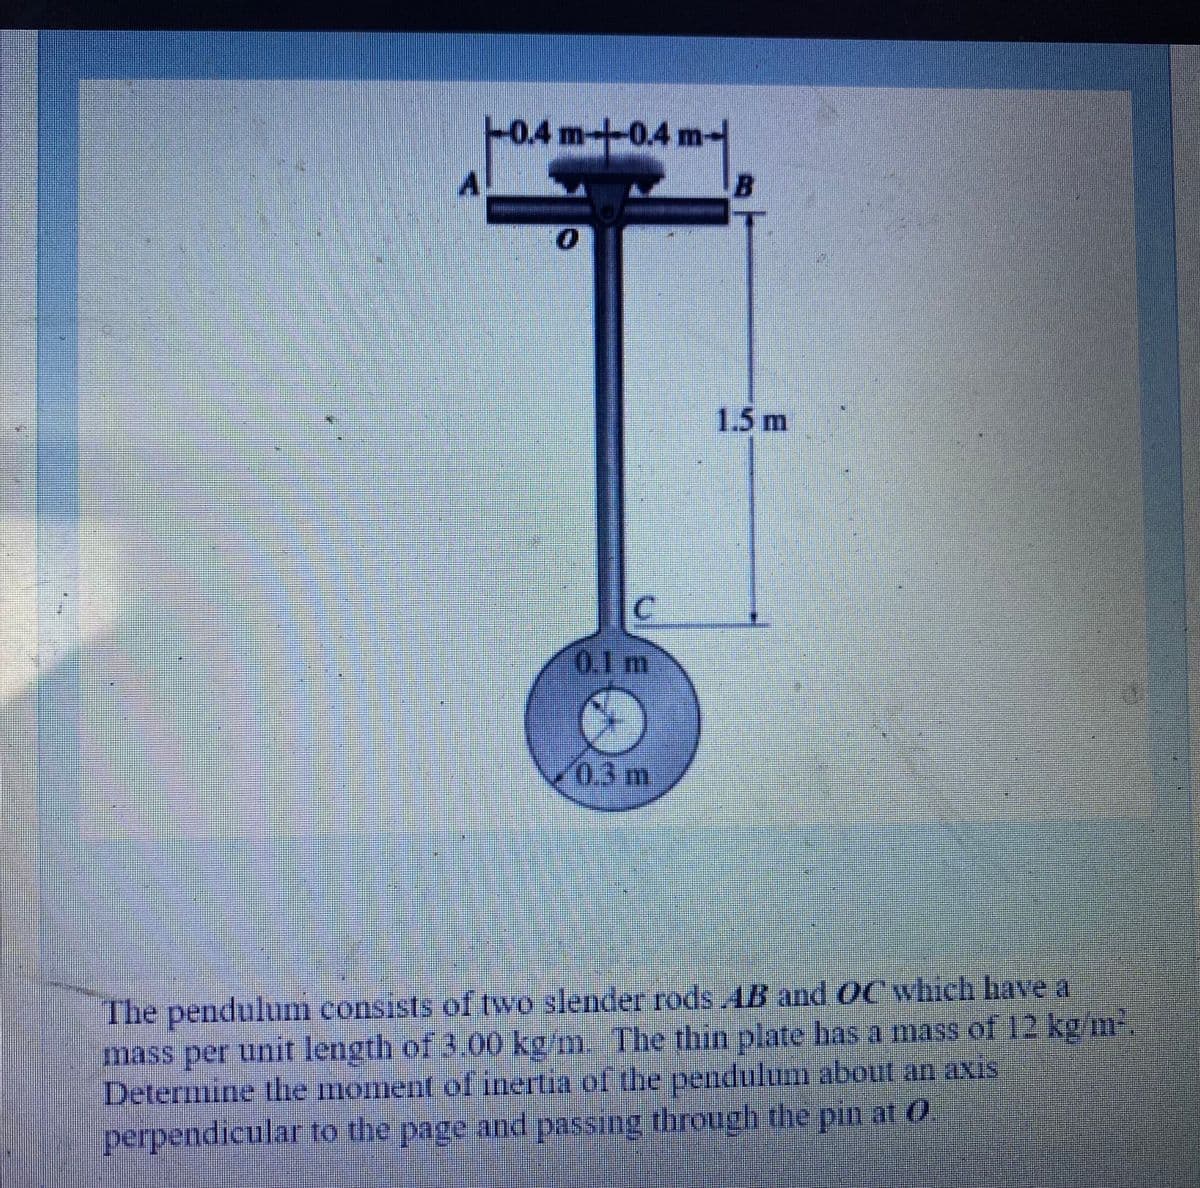 0.4m-0.4 m-
1.5 m
0.1 m
%23
03m
The pendulum consists of two slender rods AB and OC which have a
mass per unit length of 3.00 kg m The thin plate has a mass of 12 kg m
Determine the moment of inertia of the pendulum about an axis
perpendicular to the page and passing through the pin at 0
